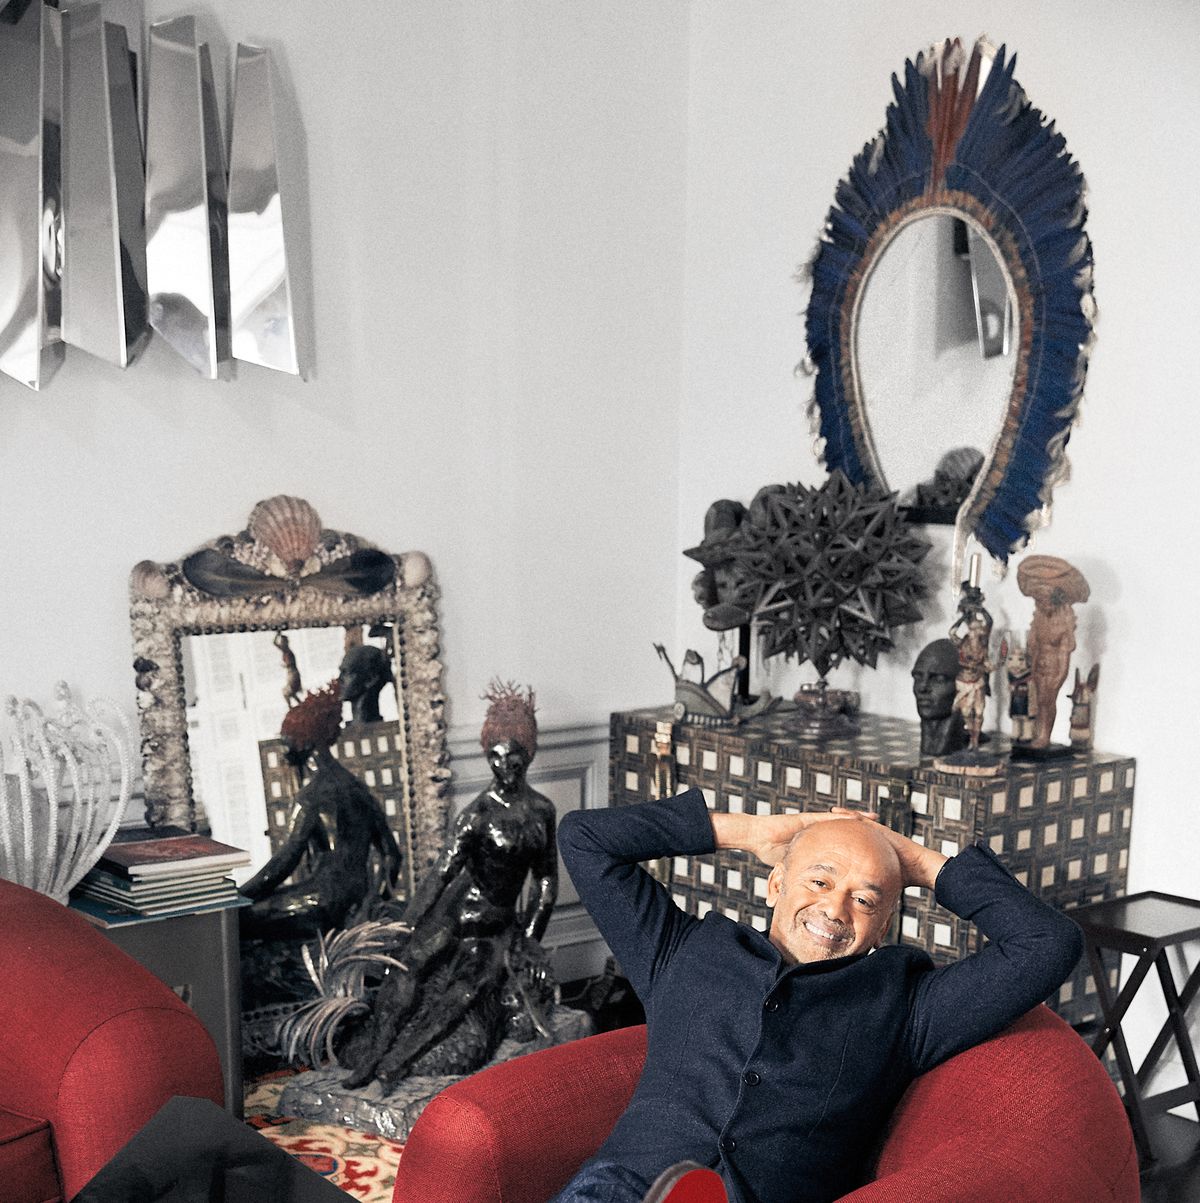 I don't think about comfort when I design, says Christian Louboutin